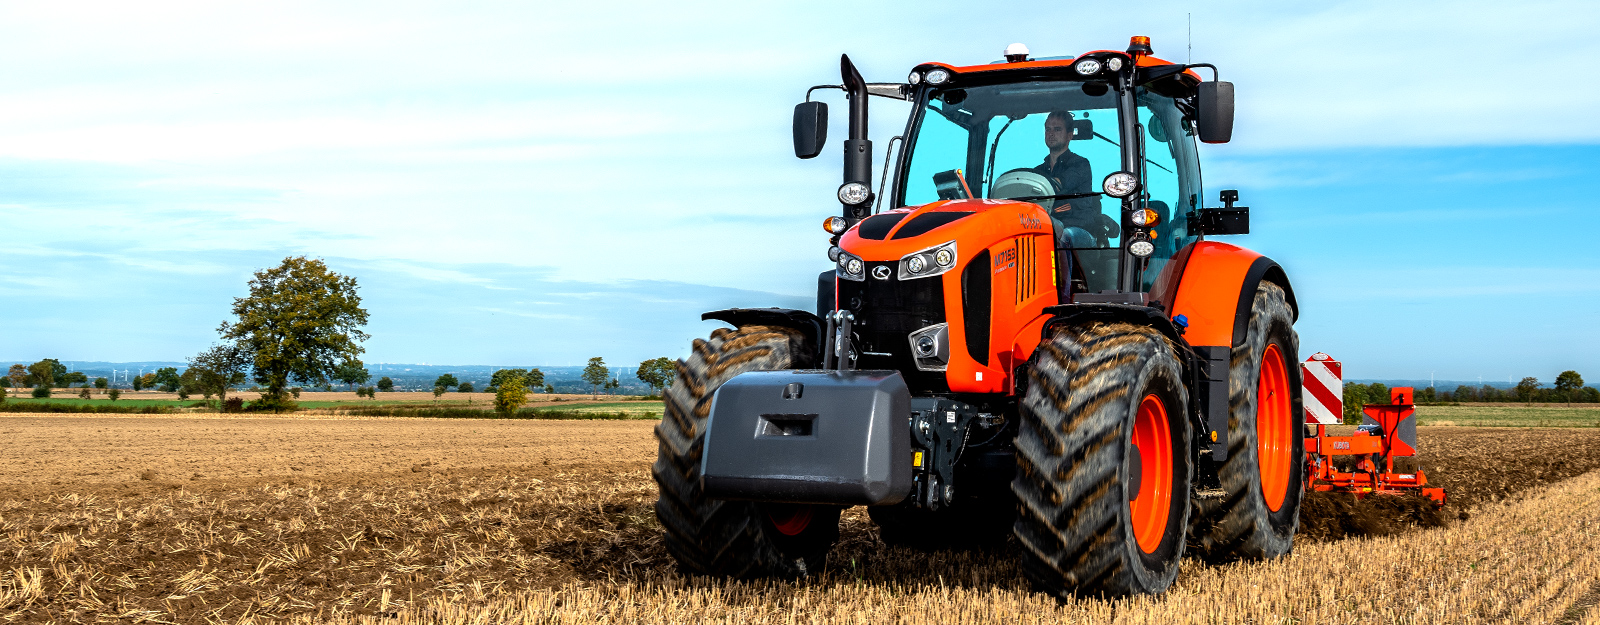 Tractor | Products & Solutions | Kubota Global Site